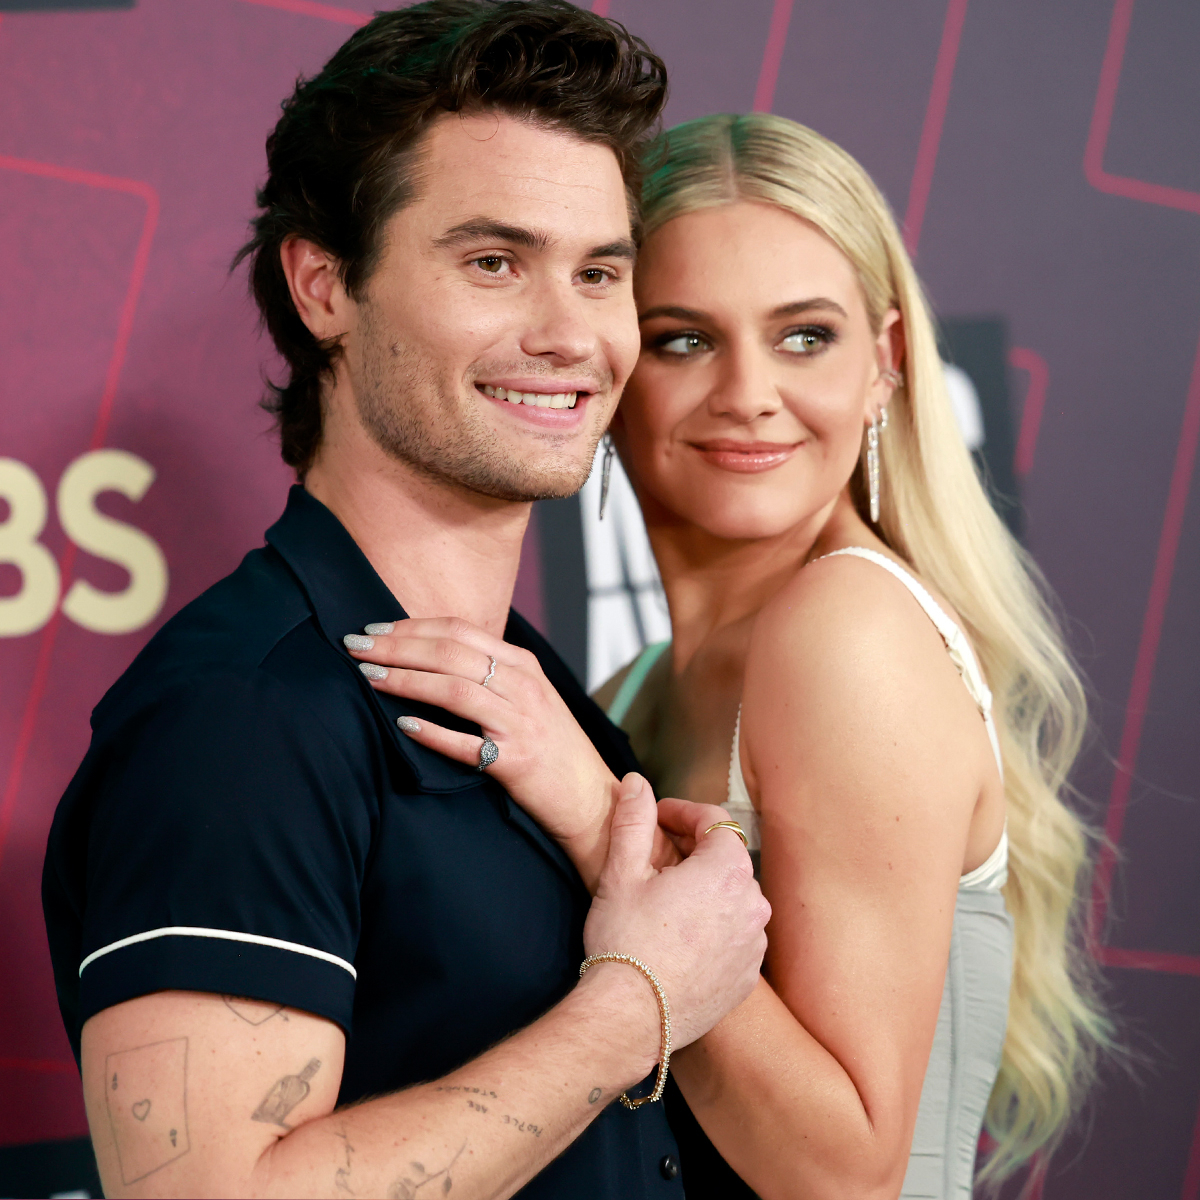 Kelsea Ballerini Shares Video Preparing for 1st Date With Chase Stokes